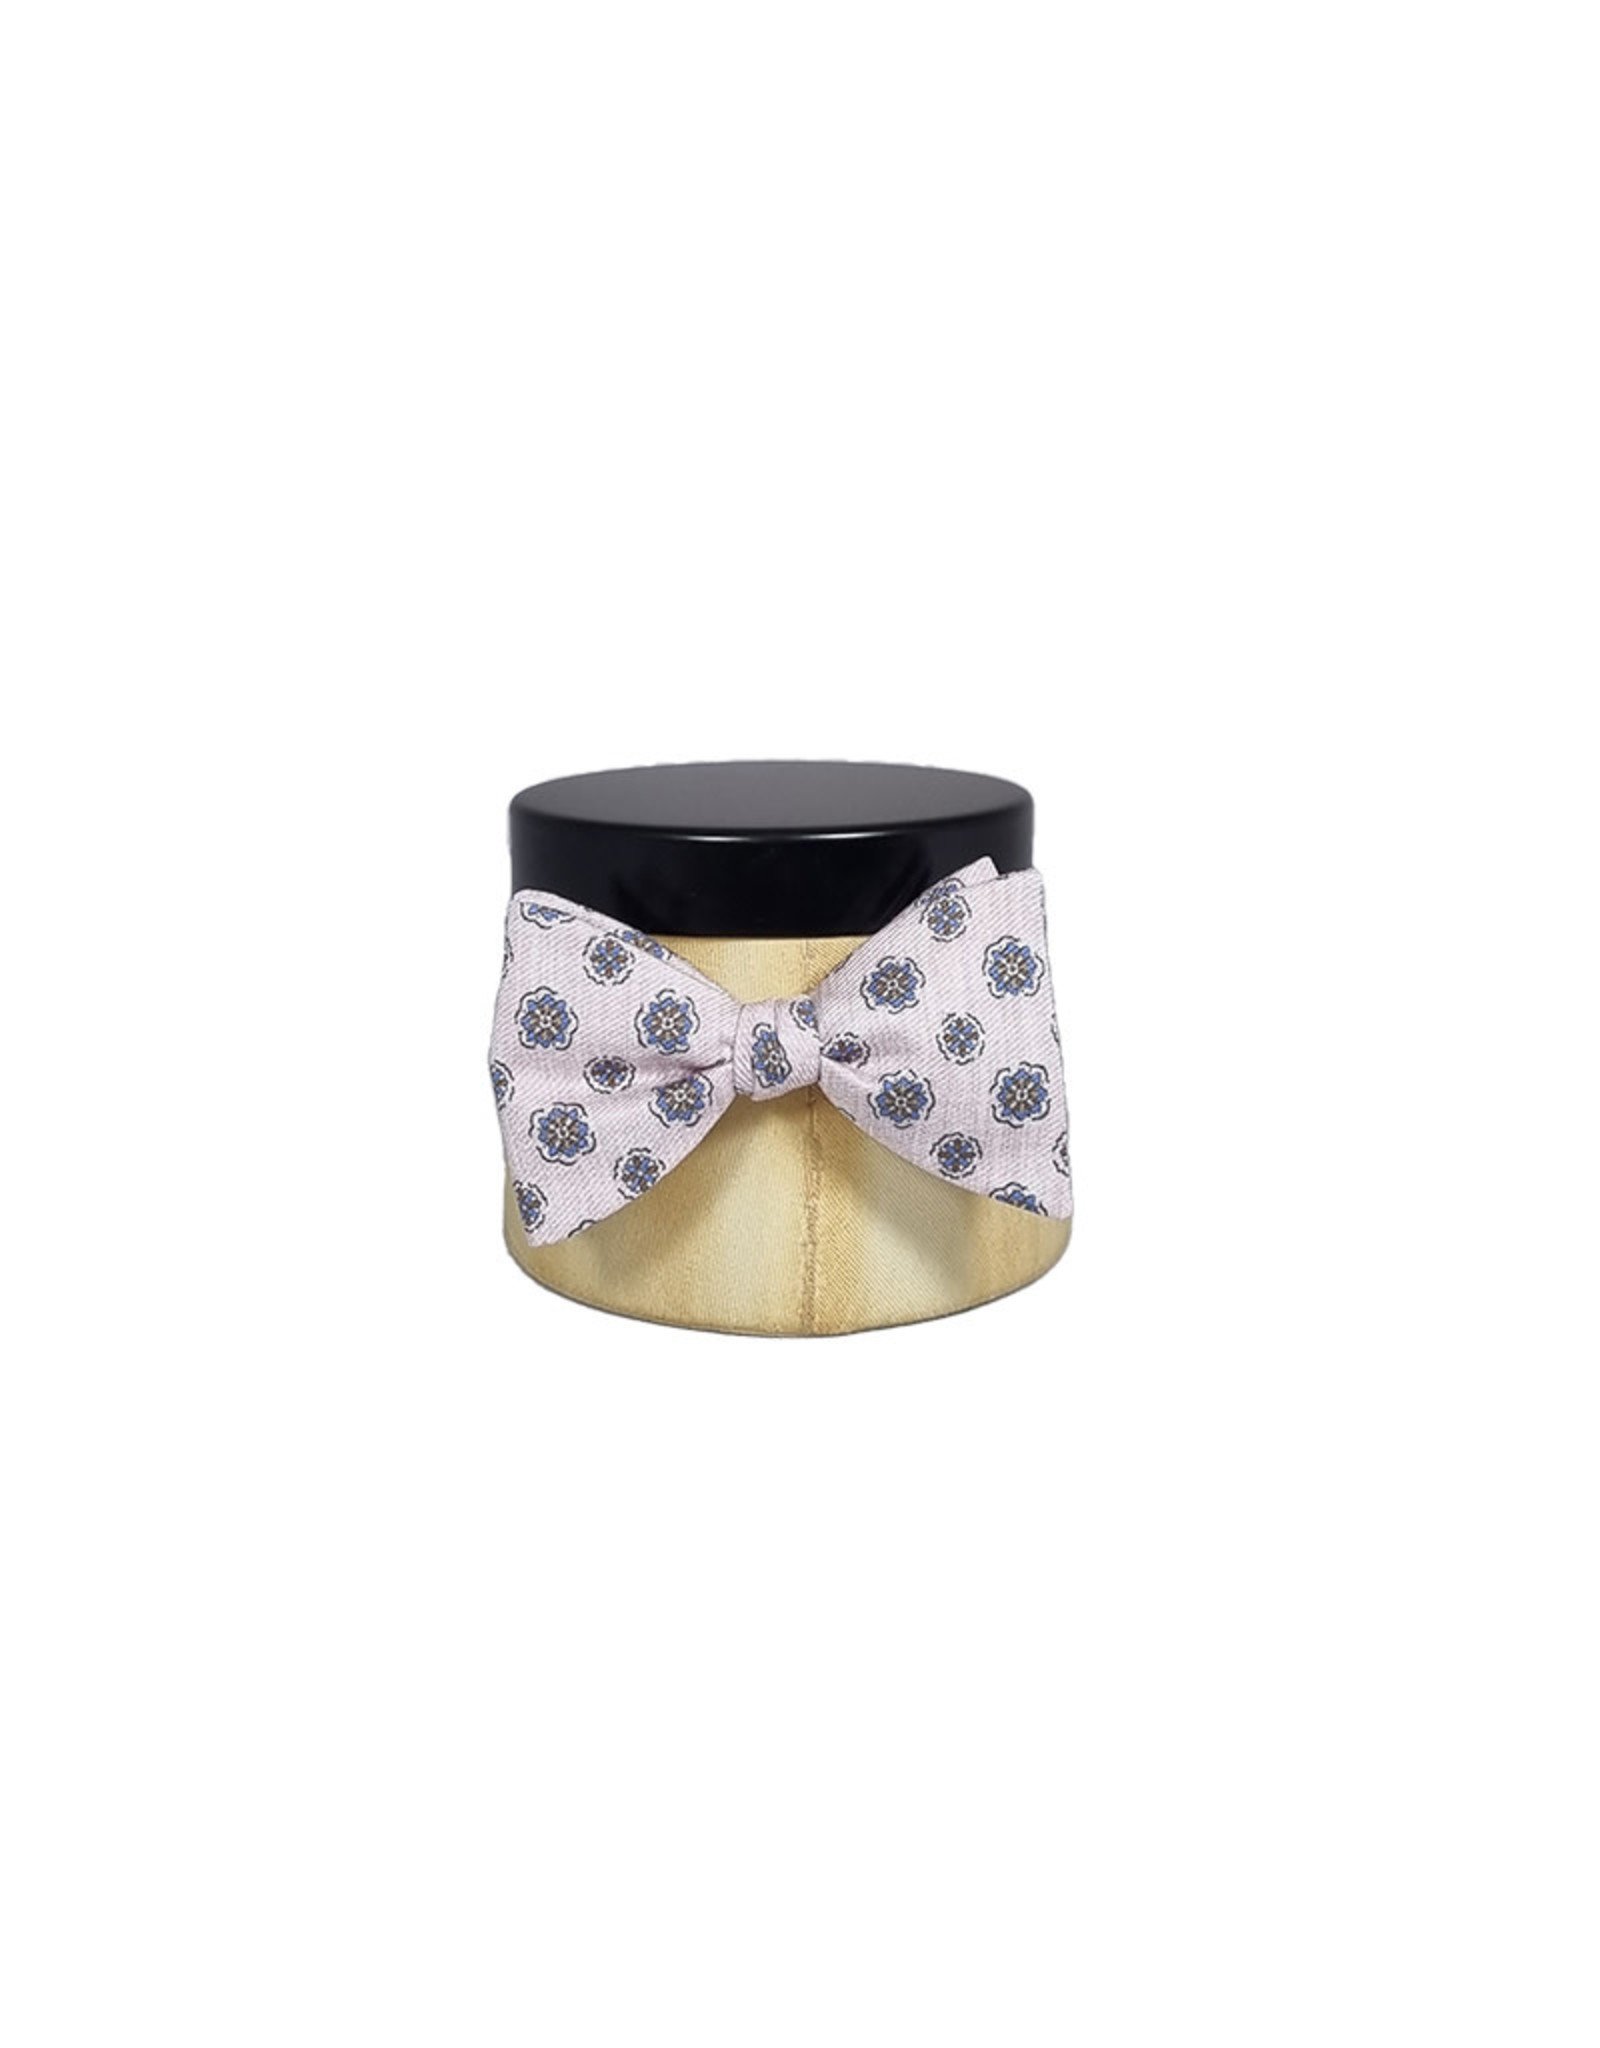 Calabrese Calabrese bow tie medallion pink